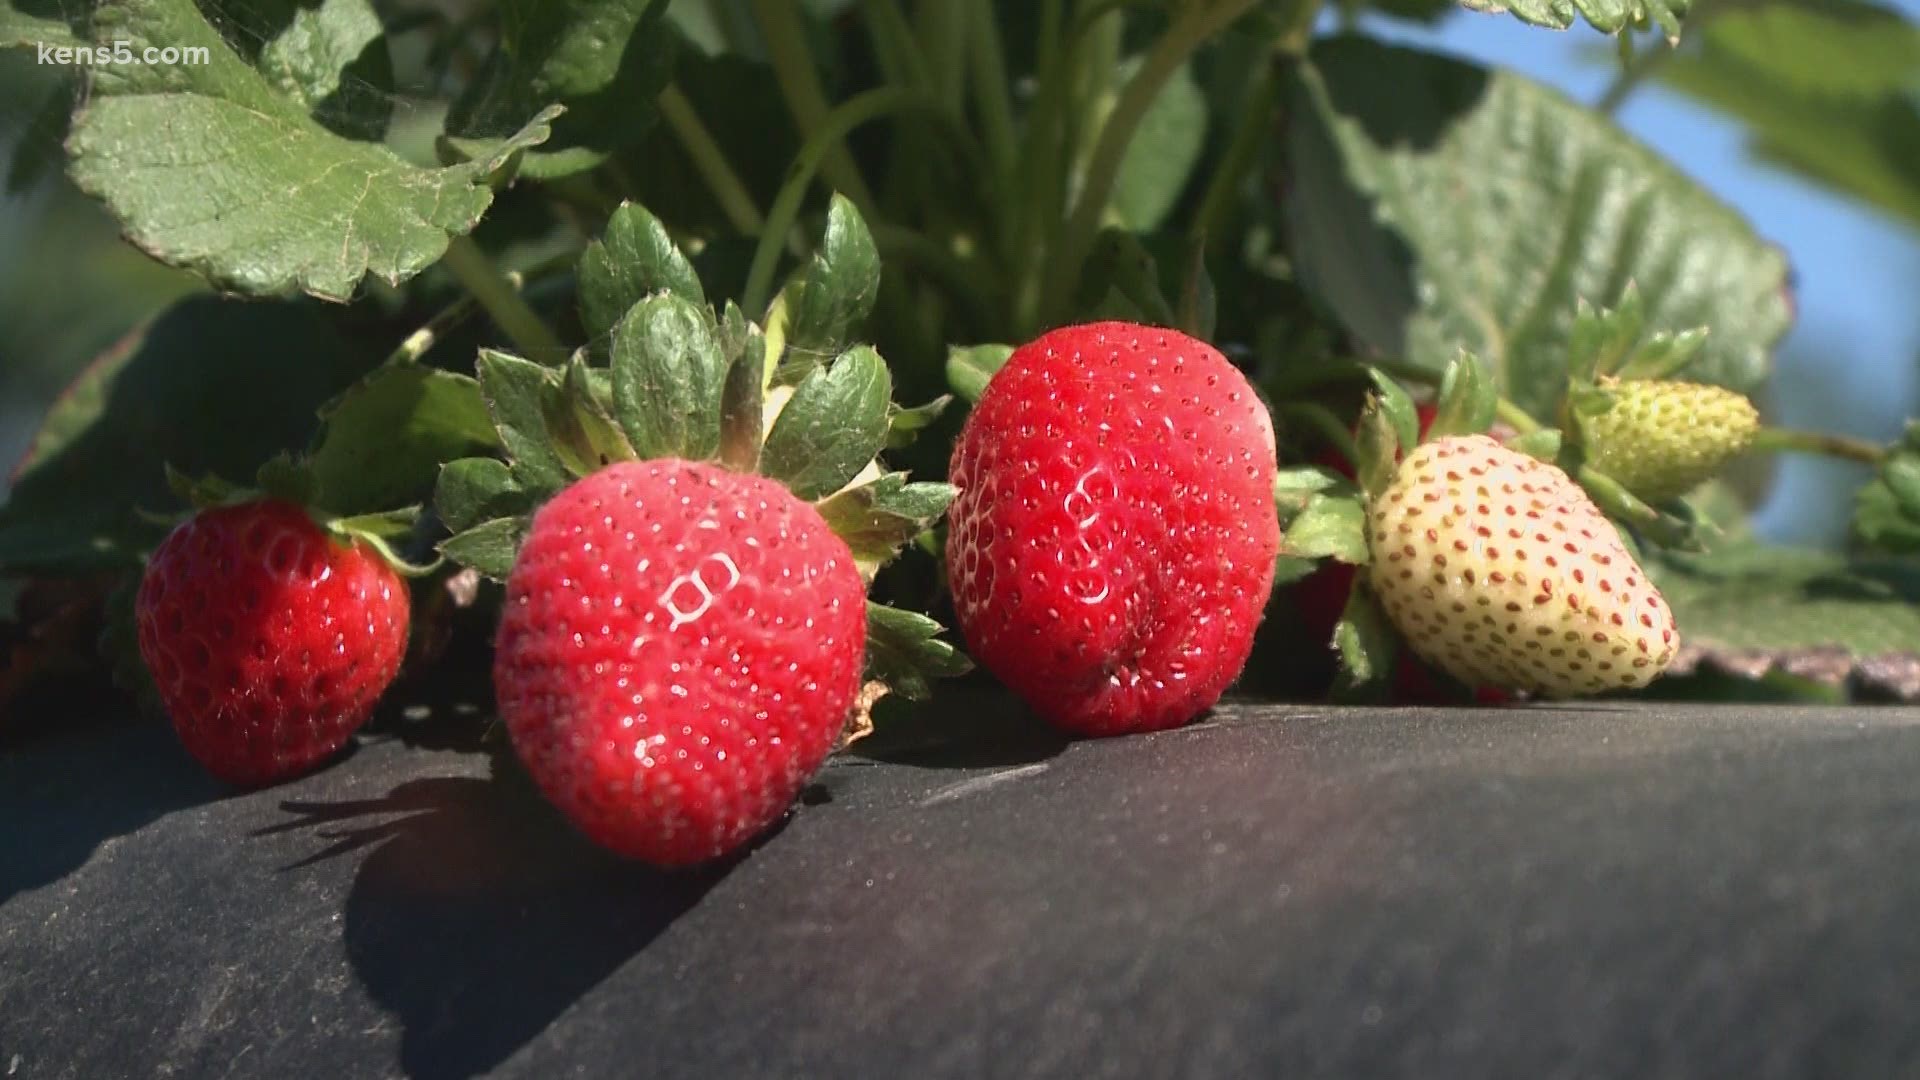 Folks around Poteet grow some of the best strawberries in the world.